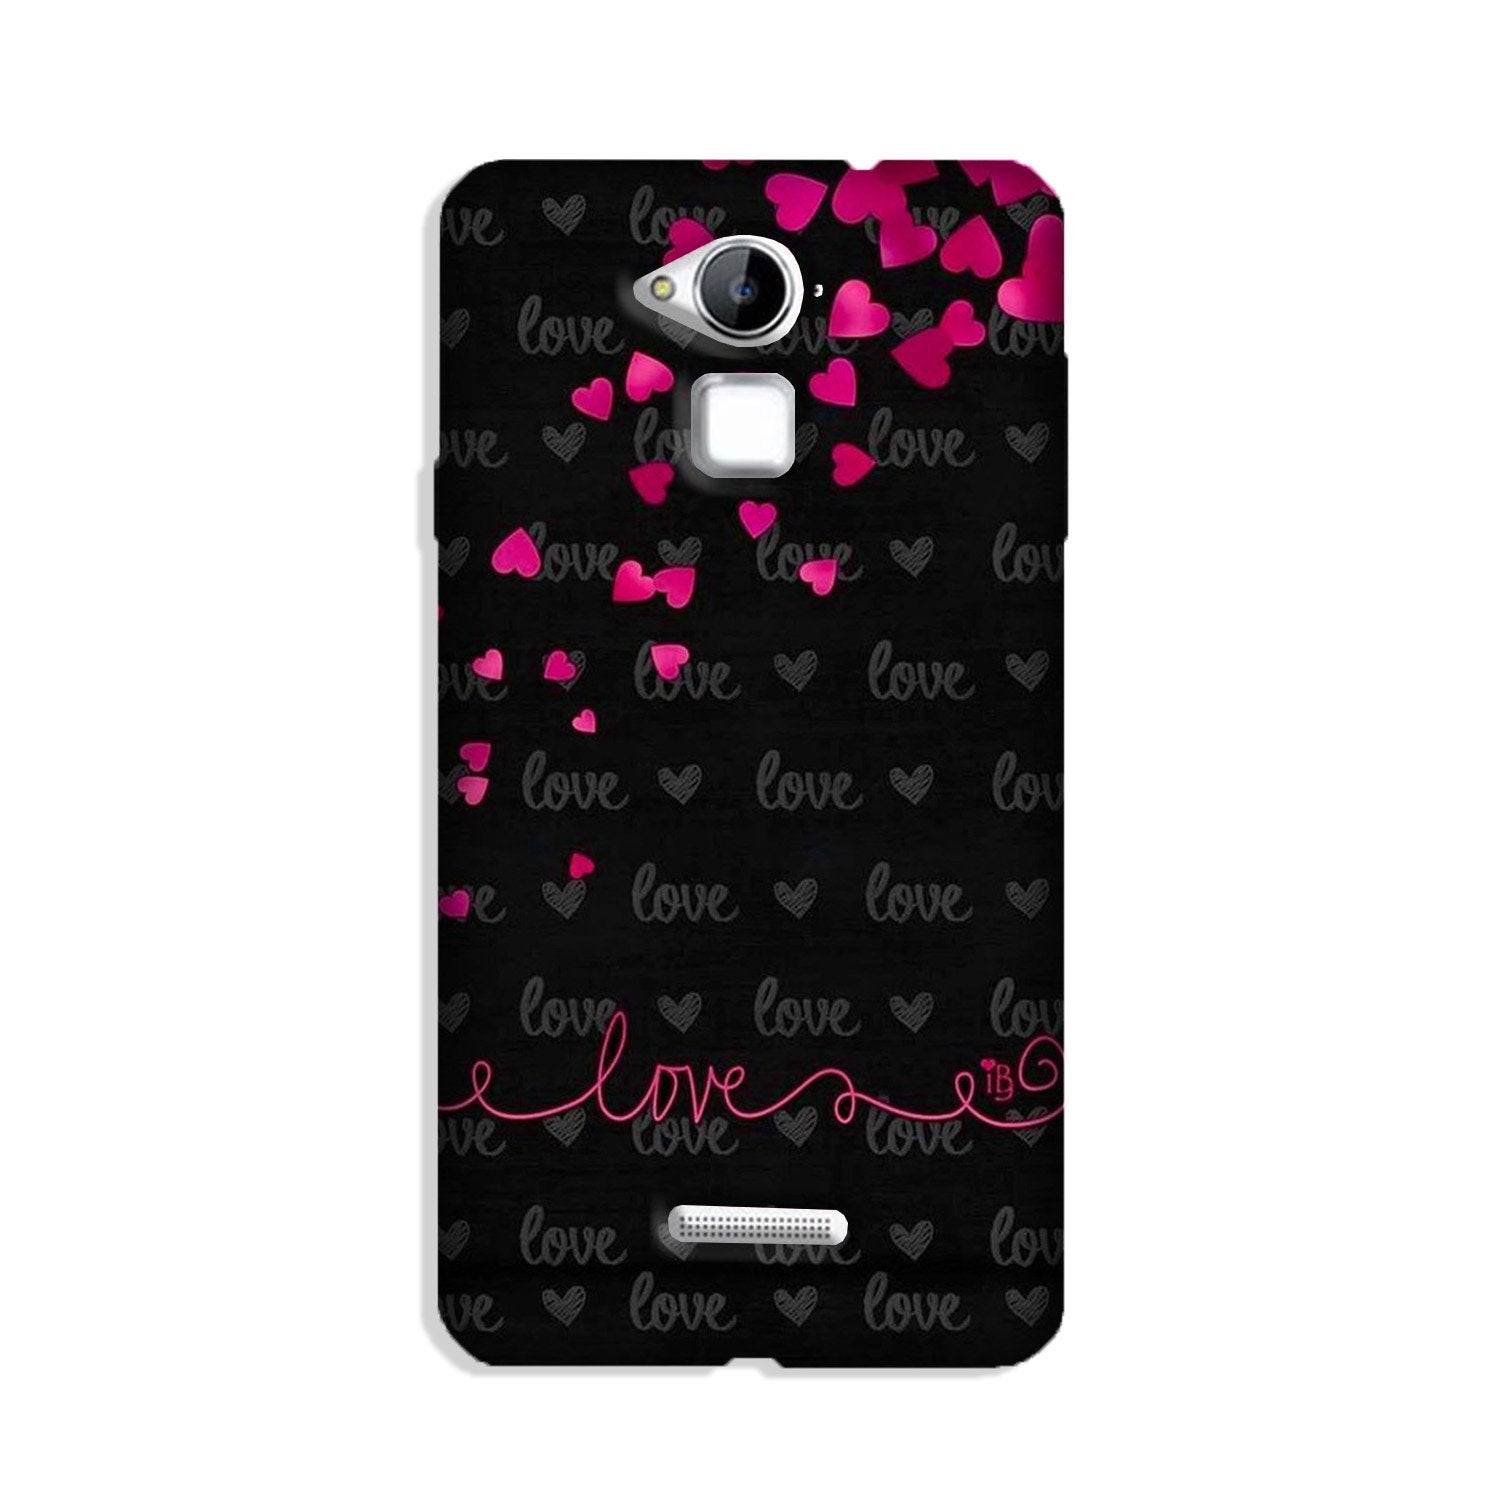 Love in Air Case for Coolpad Note 3